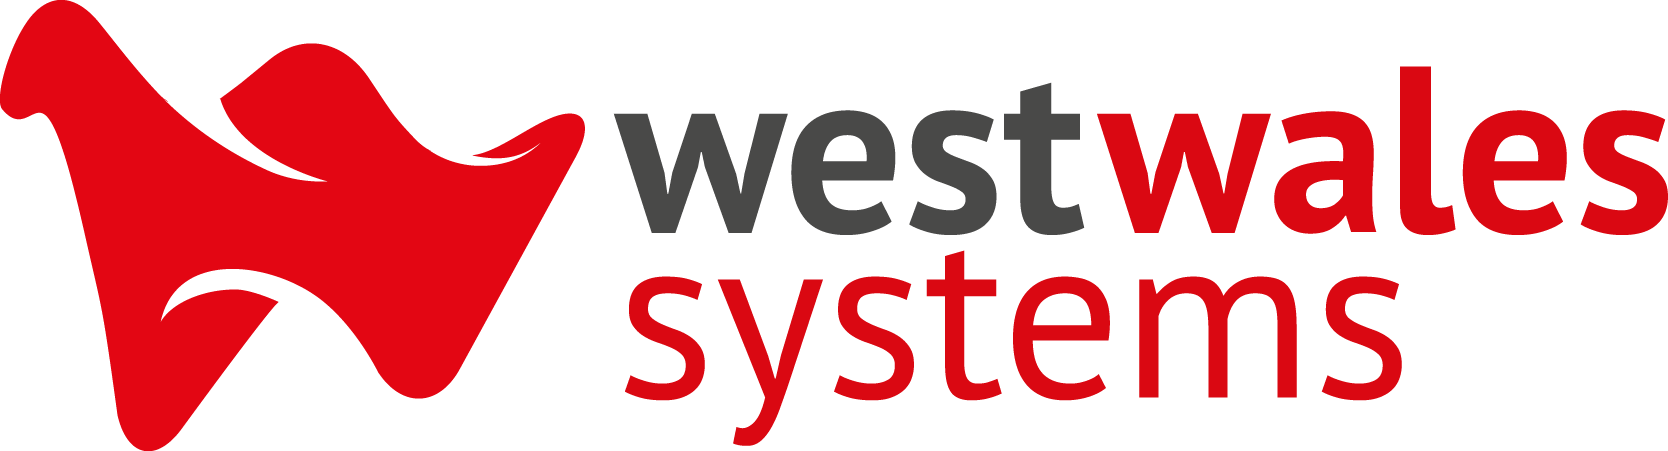 logo for West Wales Systems